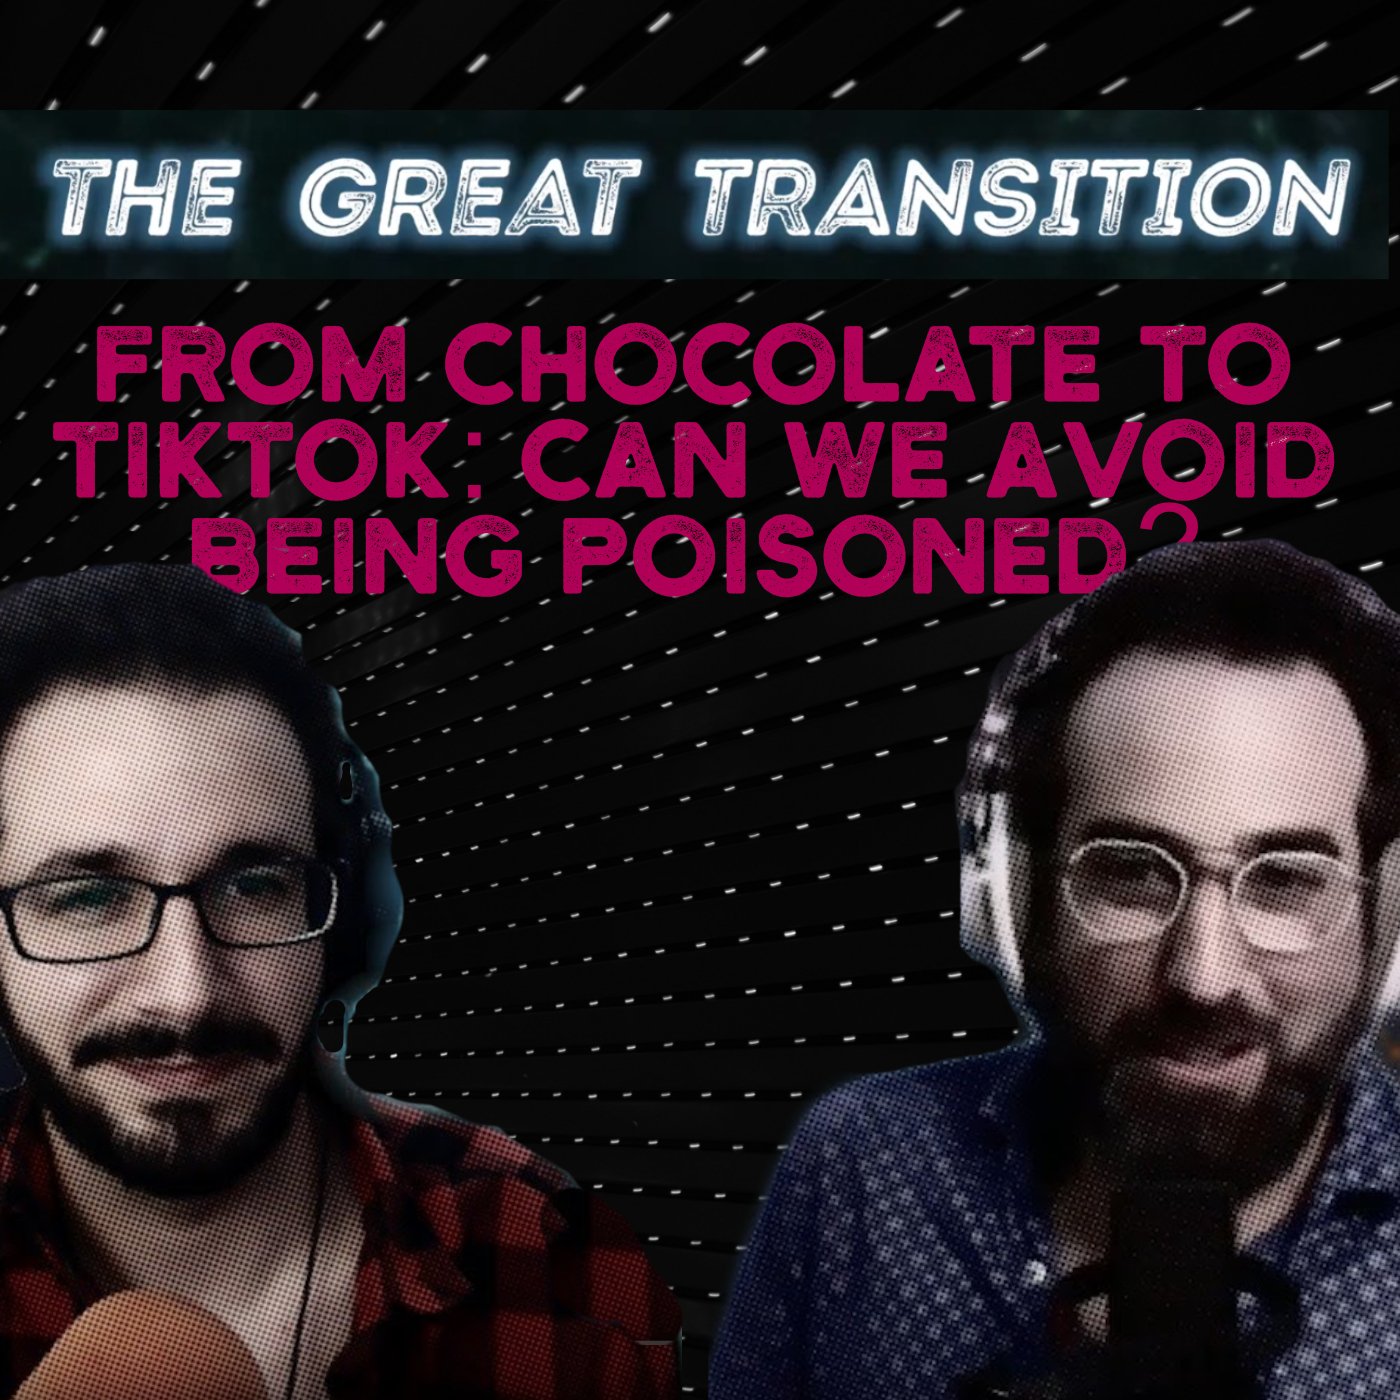 The Great Transition - From Chocolate to TikTok: Can We Avoid Being Poisoned?